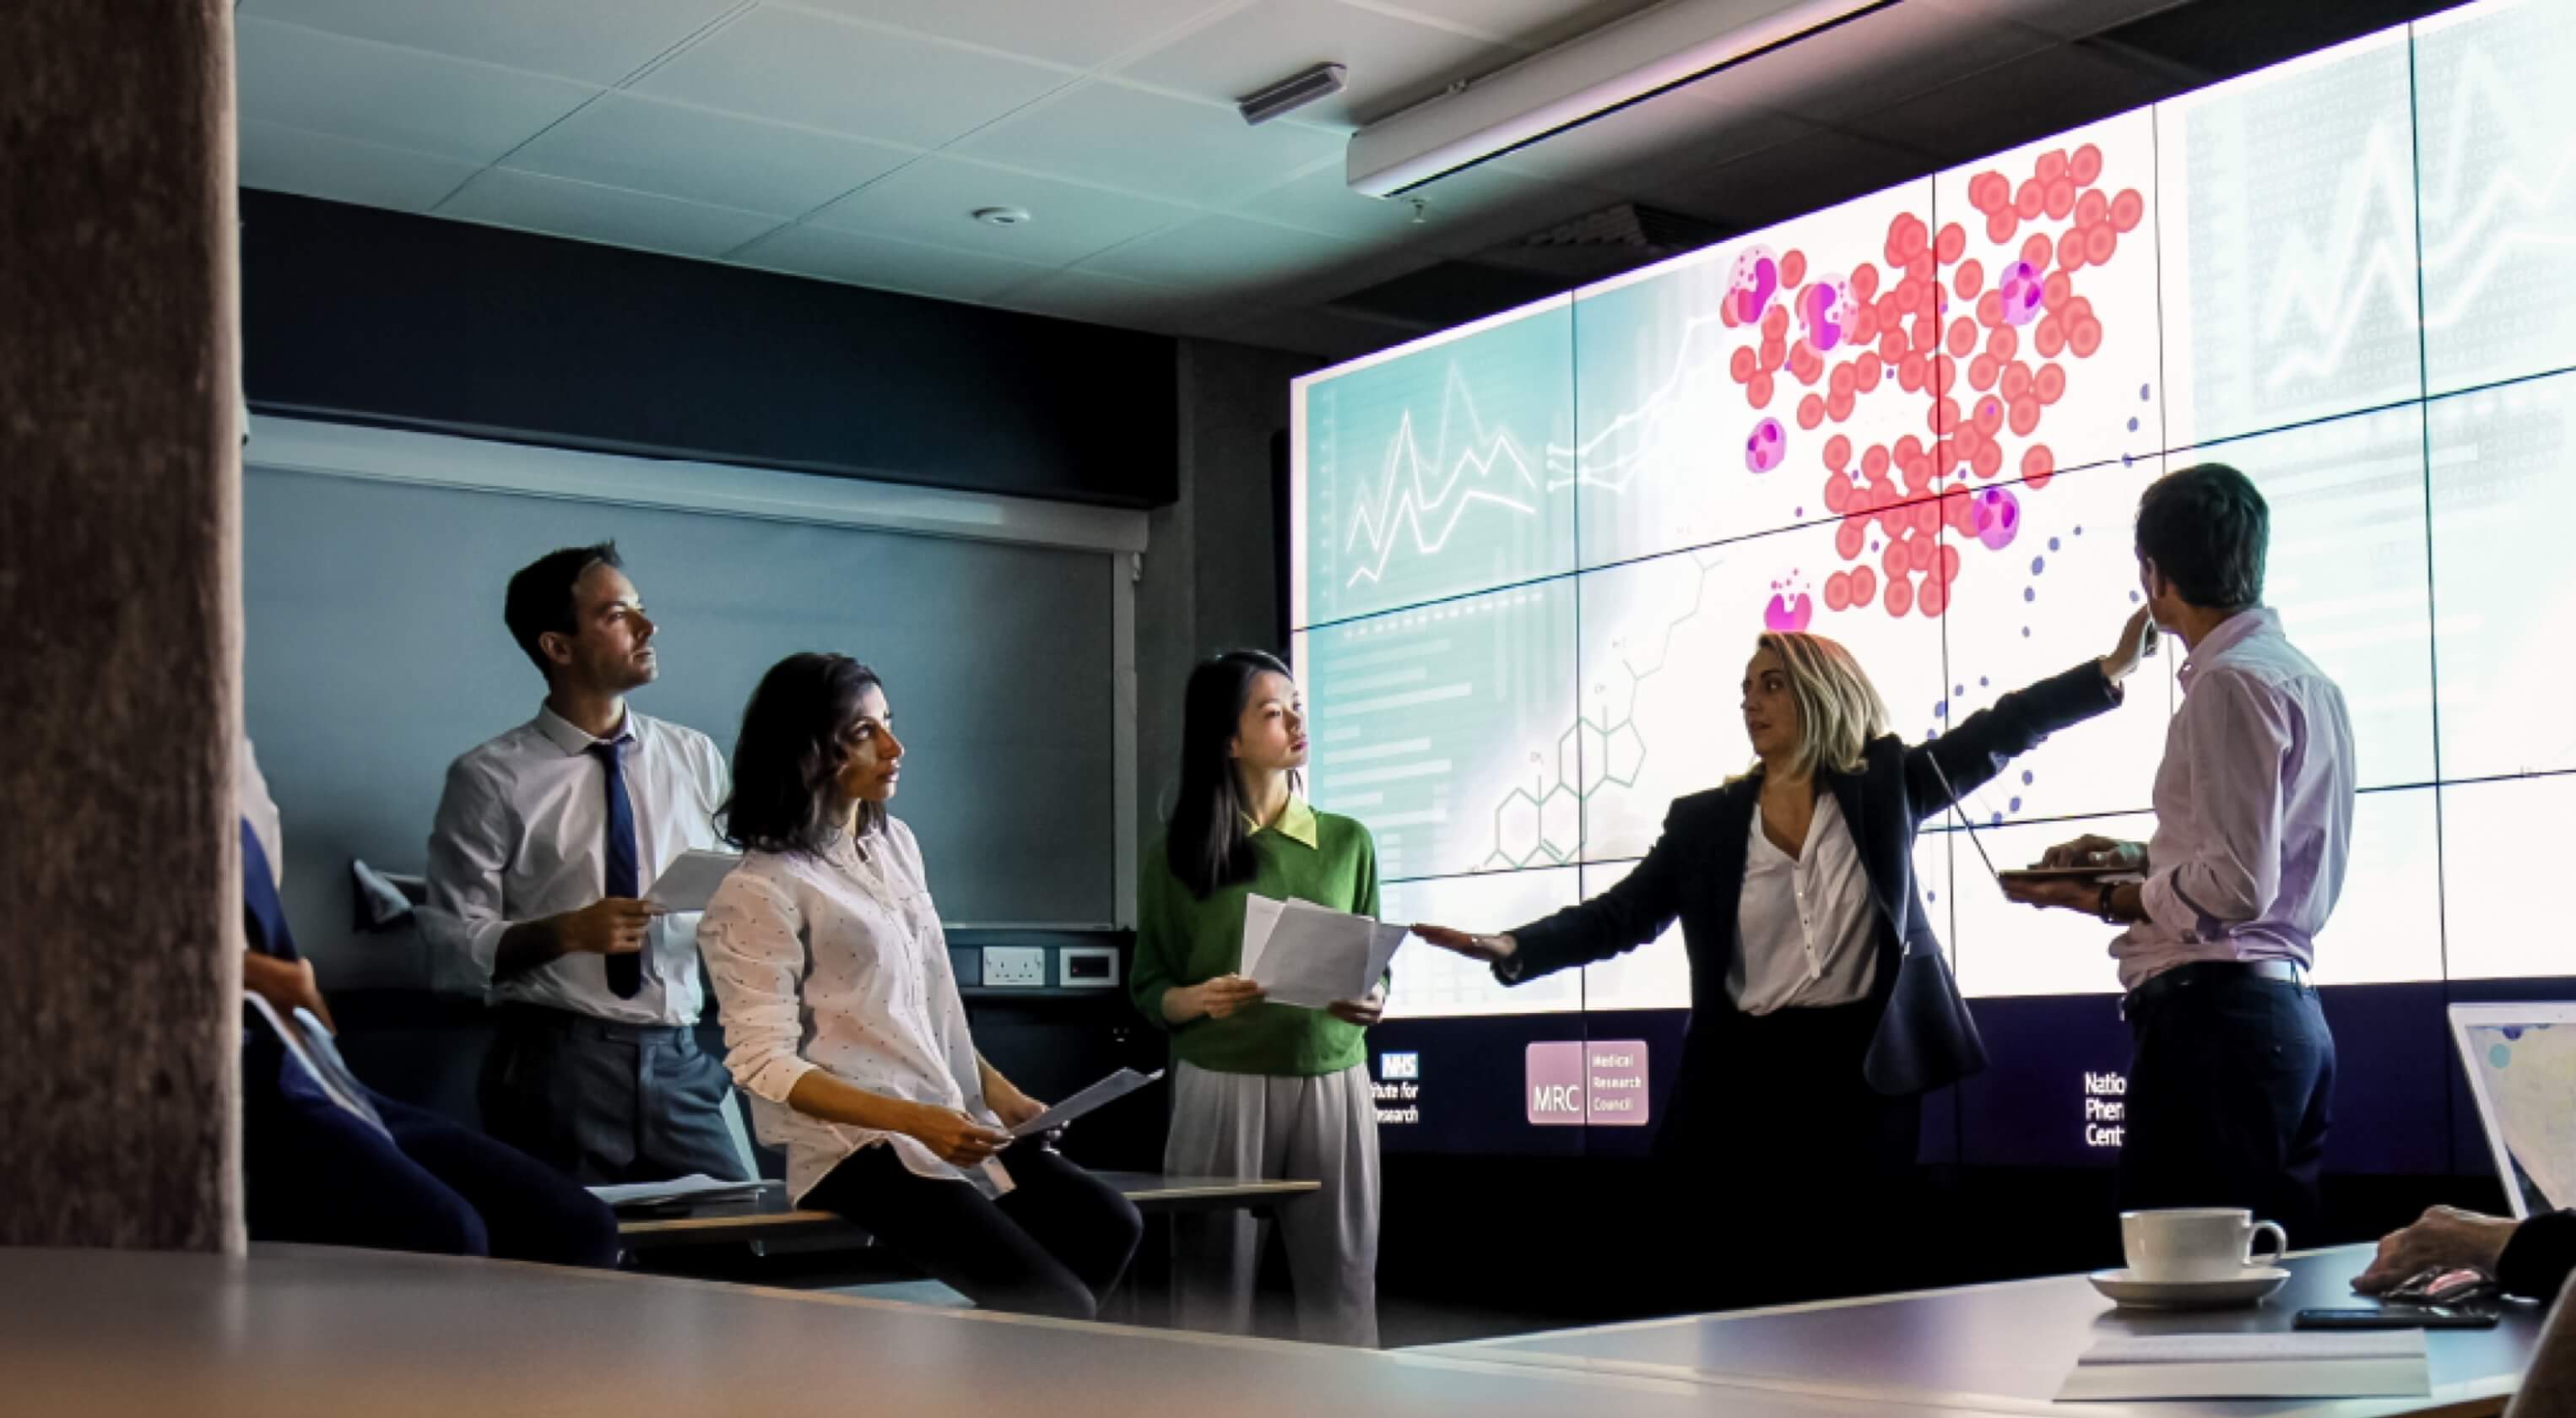 A business woman presents to her colleagues in front of a large video wall